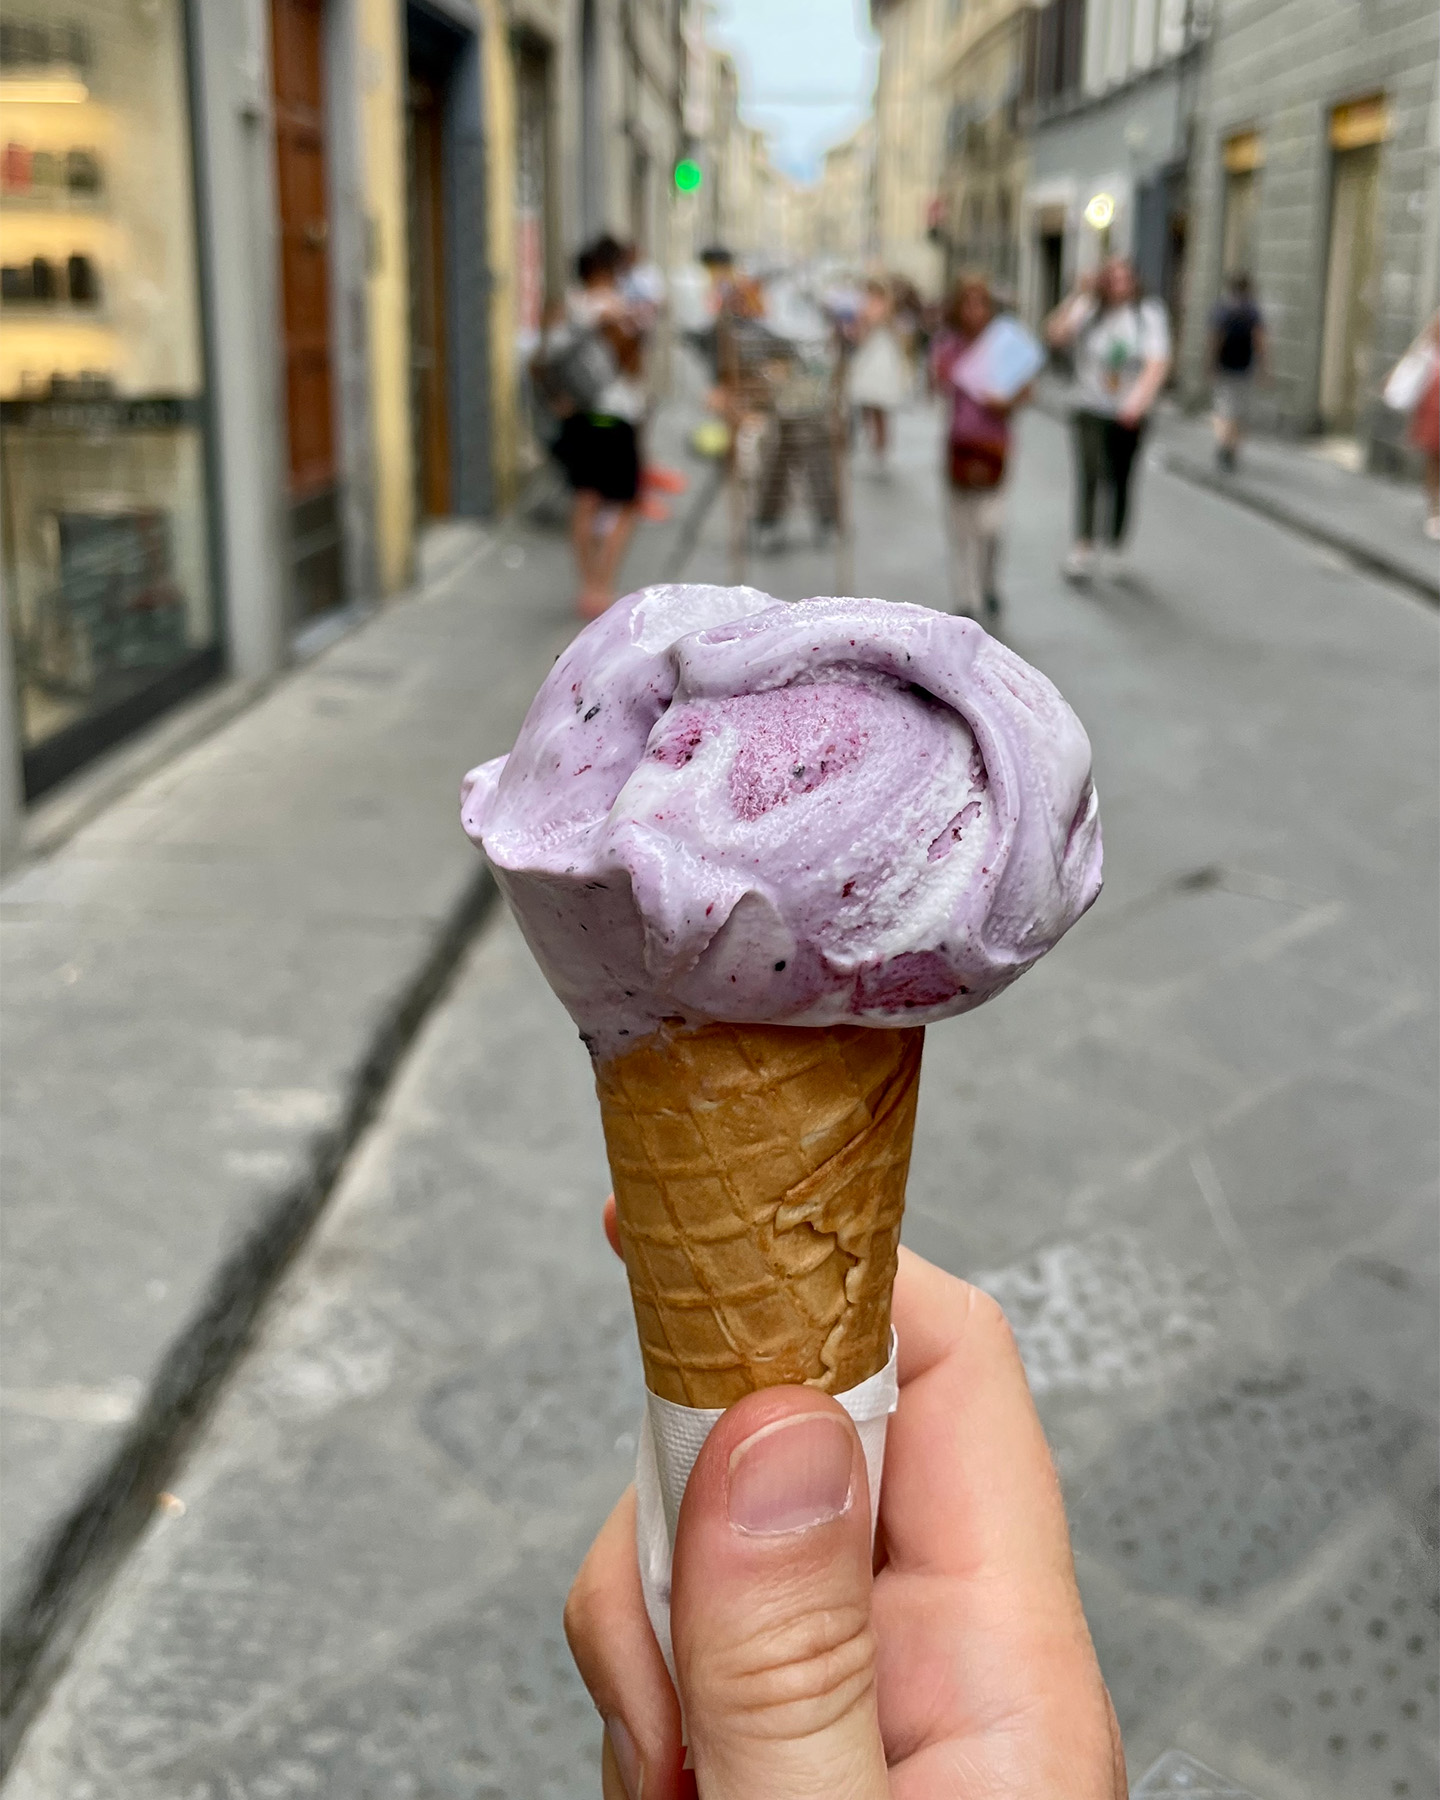 On the CRAFTED podcast, Jonathan Ellsworth talks with Alberto and Julia Bati, owners of My Sugar Gelato Artigianale, about the craft (and the hard work) of making some of the best gelato in the world. Here is that conversation, fresh from Florence.